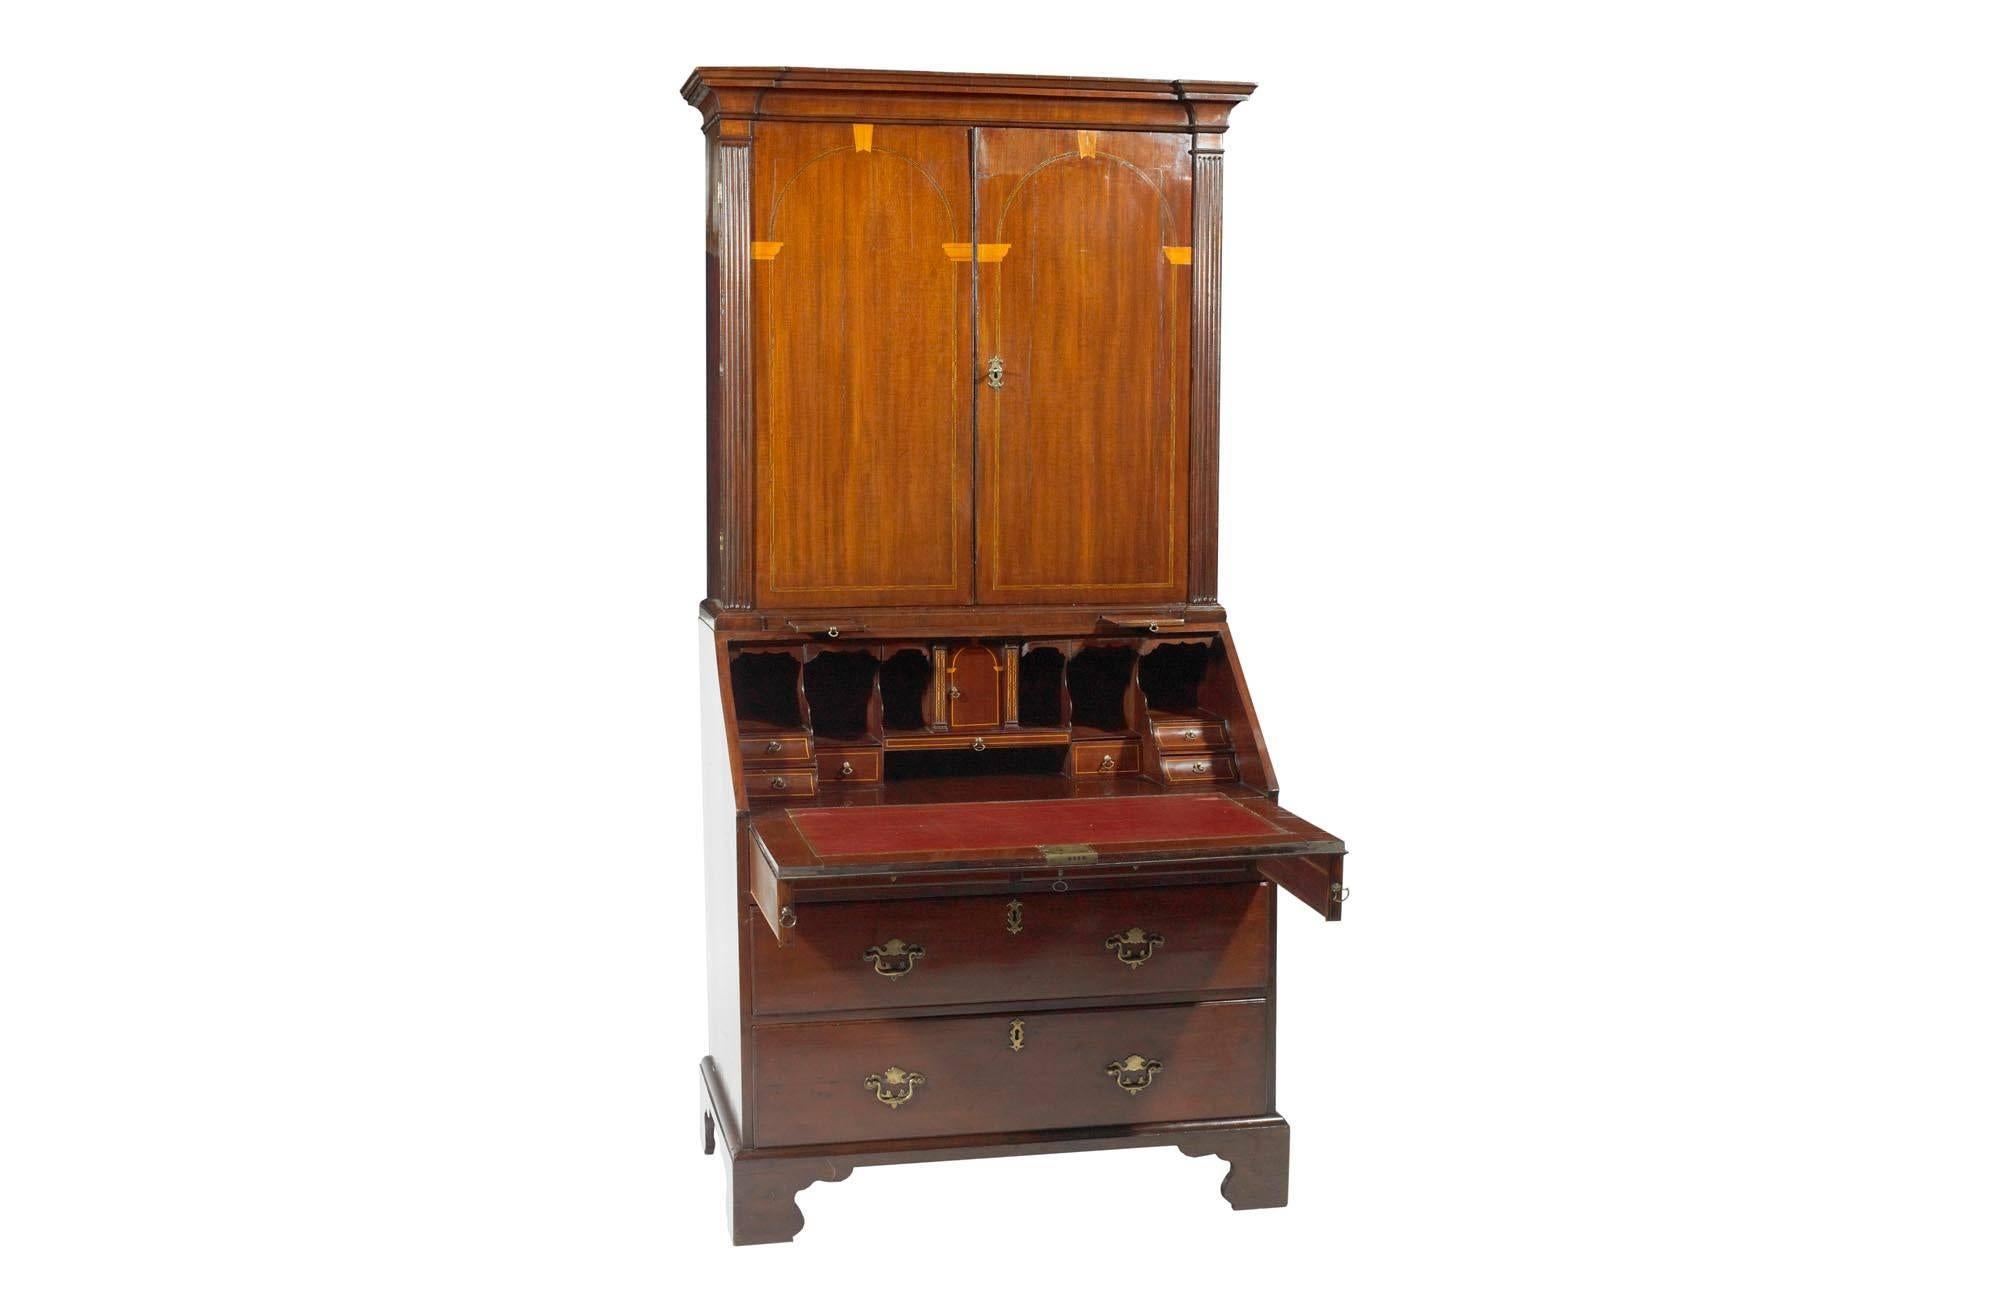 Early 19th Century George III mahogany inlaid bureau bookcase in the Neoclassical manner, the moulded and stepped cornice supported over two blind doors with Neoclassical architectural line inlay depicting classical column motif flanked with reeded